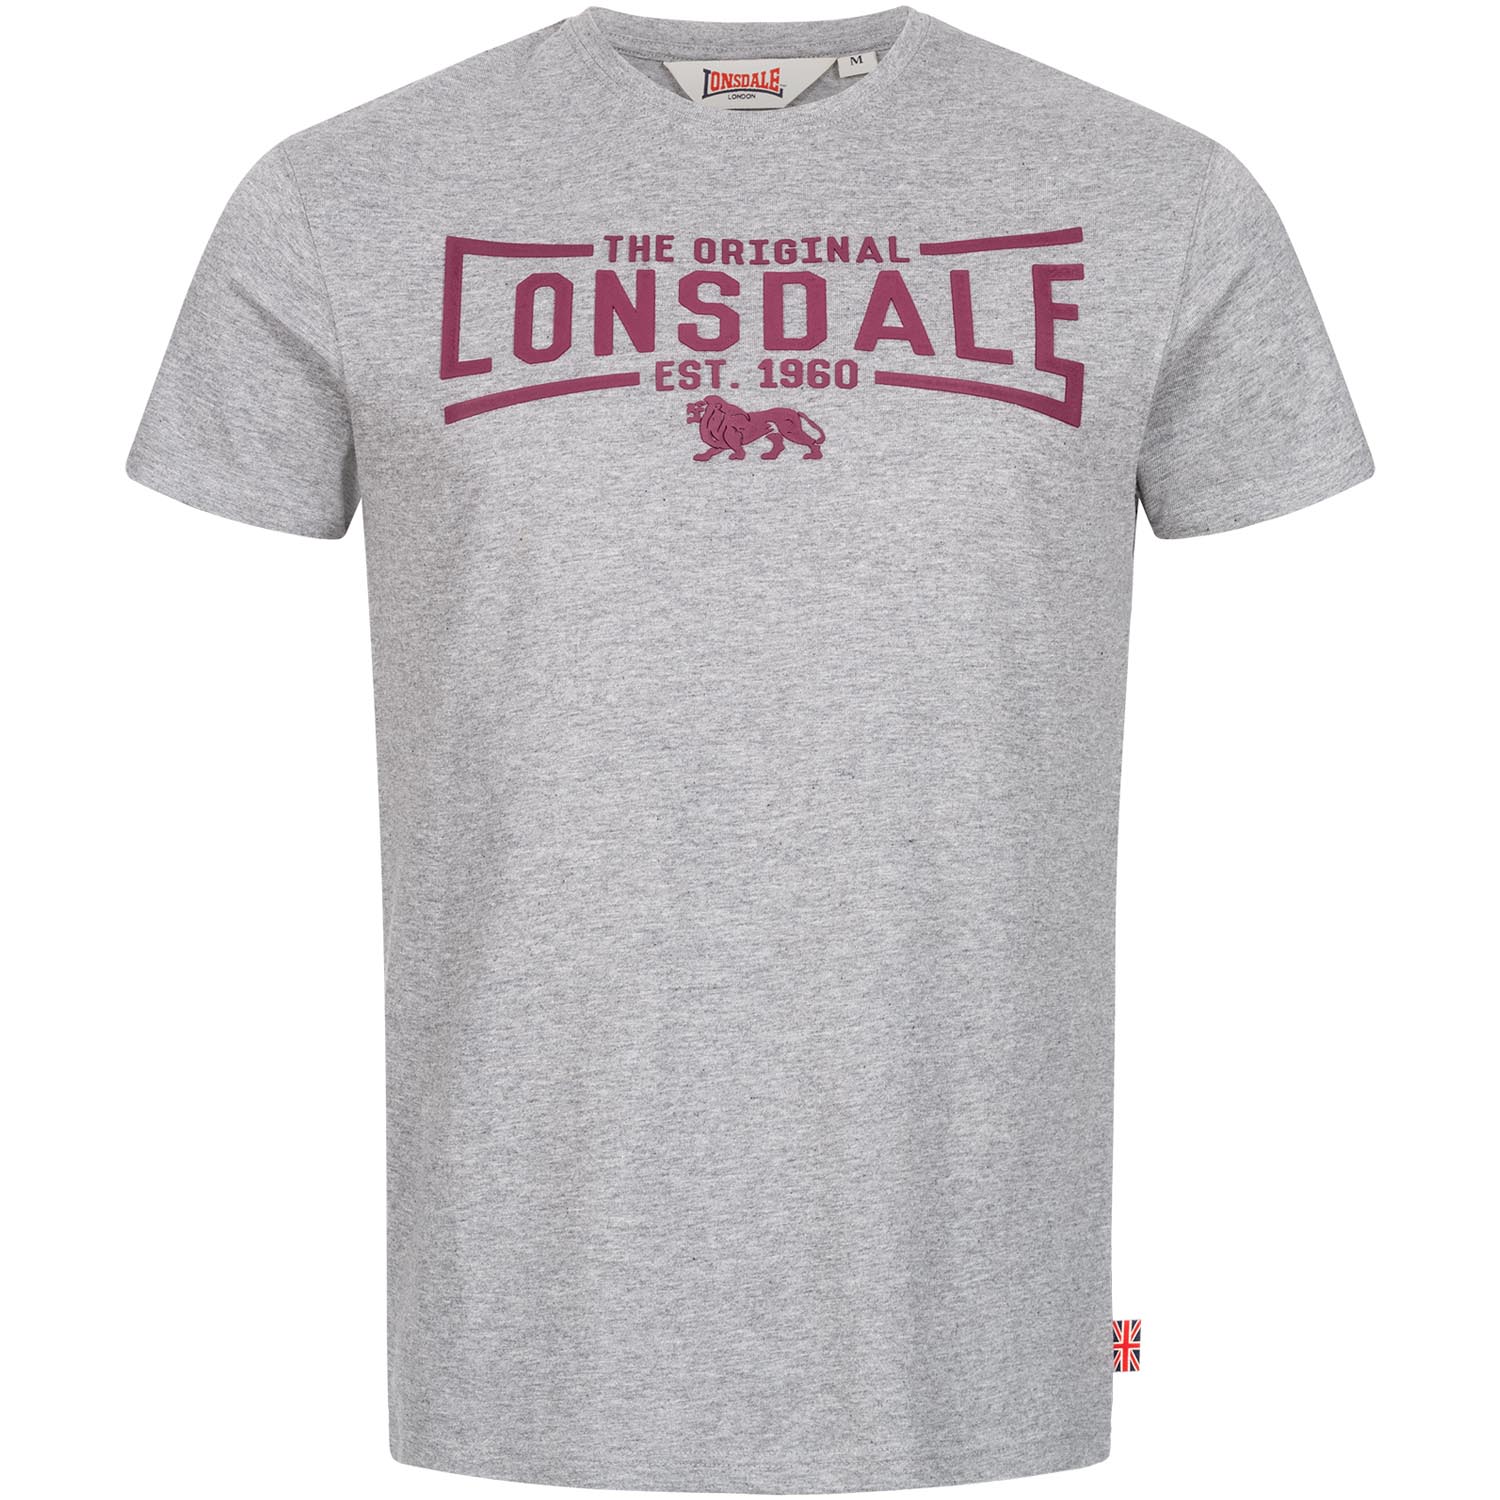 Lonsdale T-Shirt, Nybster, grau-rot, L